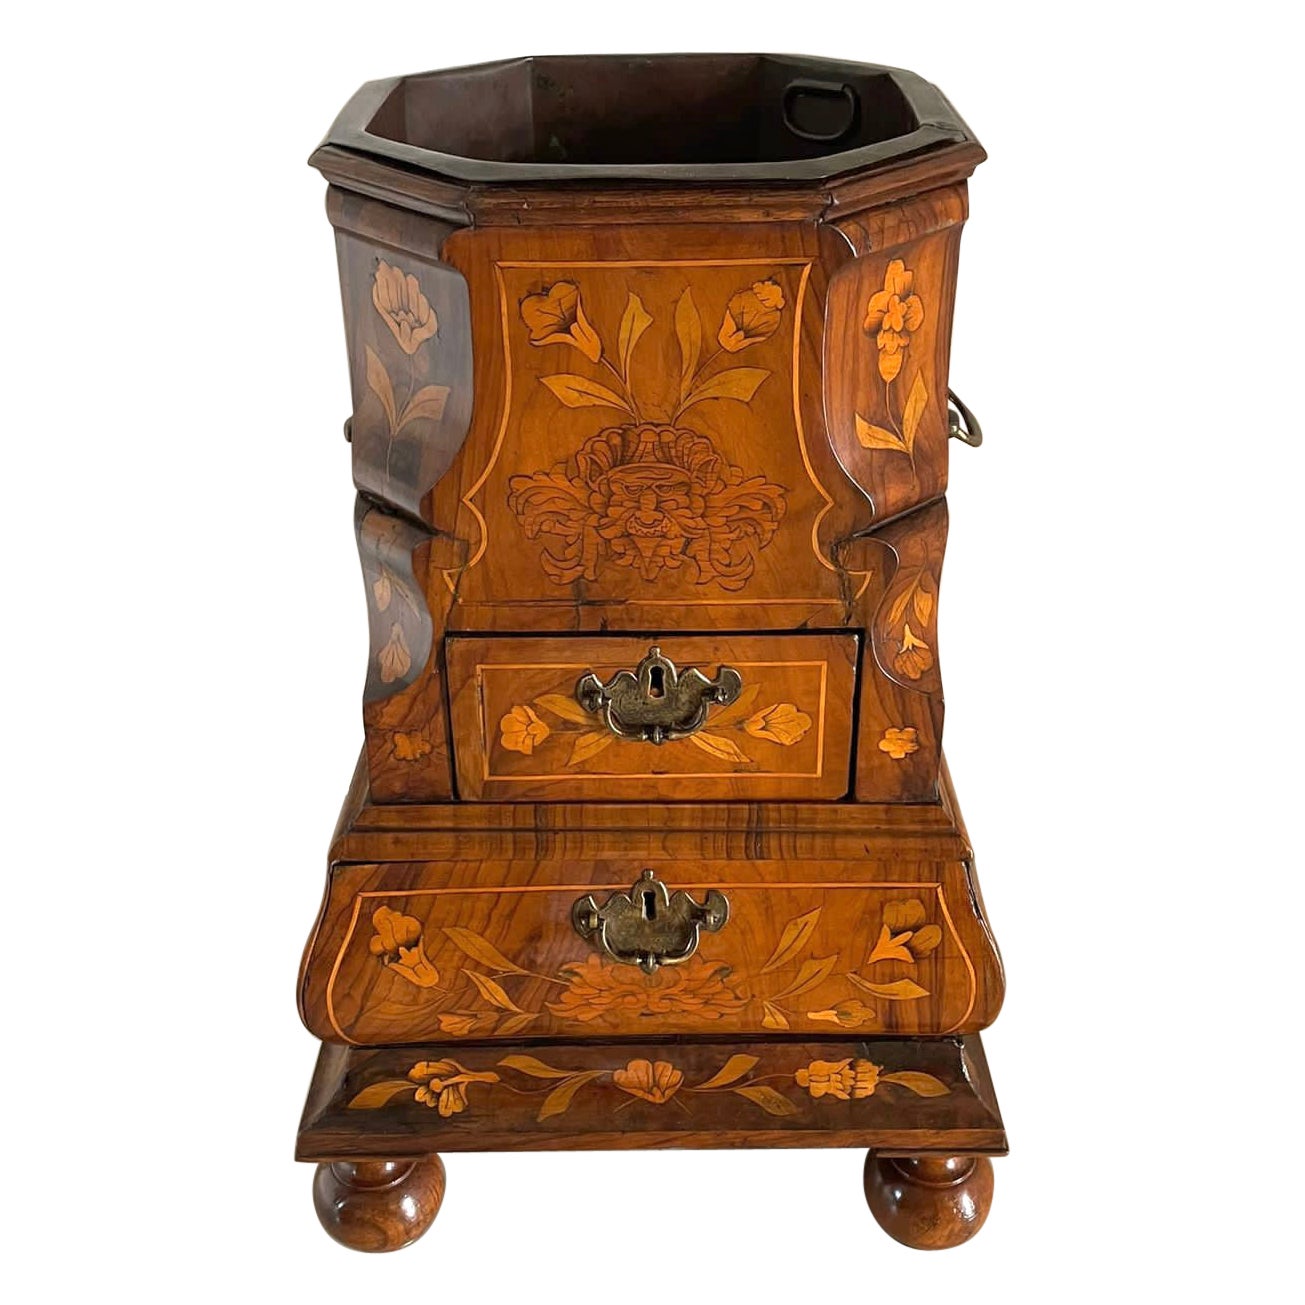 Antique Quality Floral Marquetry Burr Walnut Freestanding Champagne/Wine Cooler For Sale